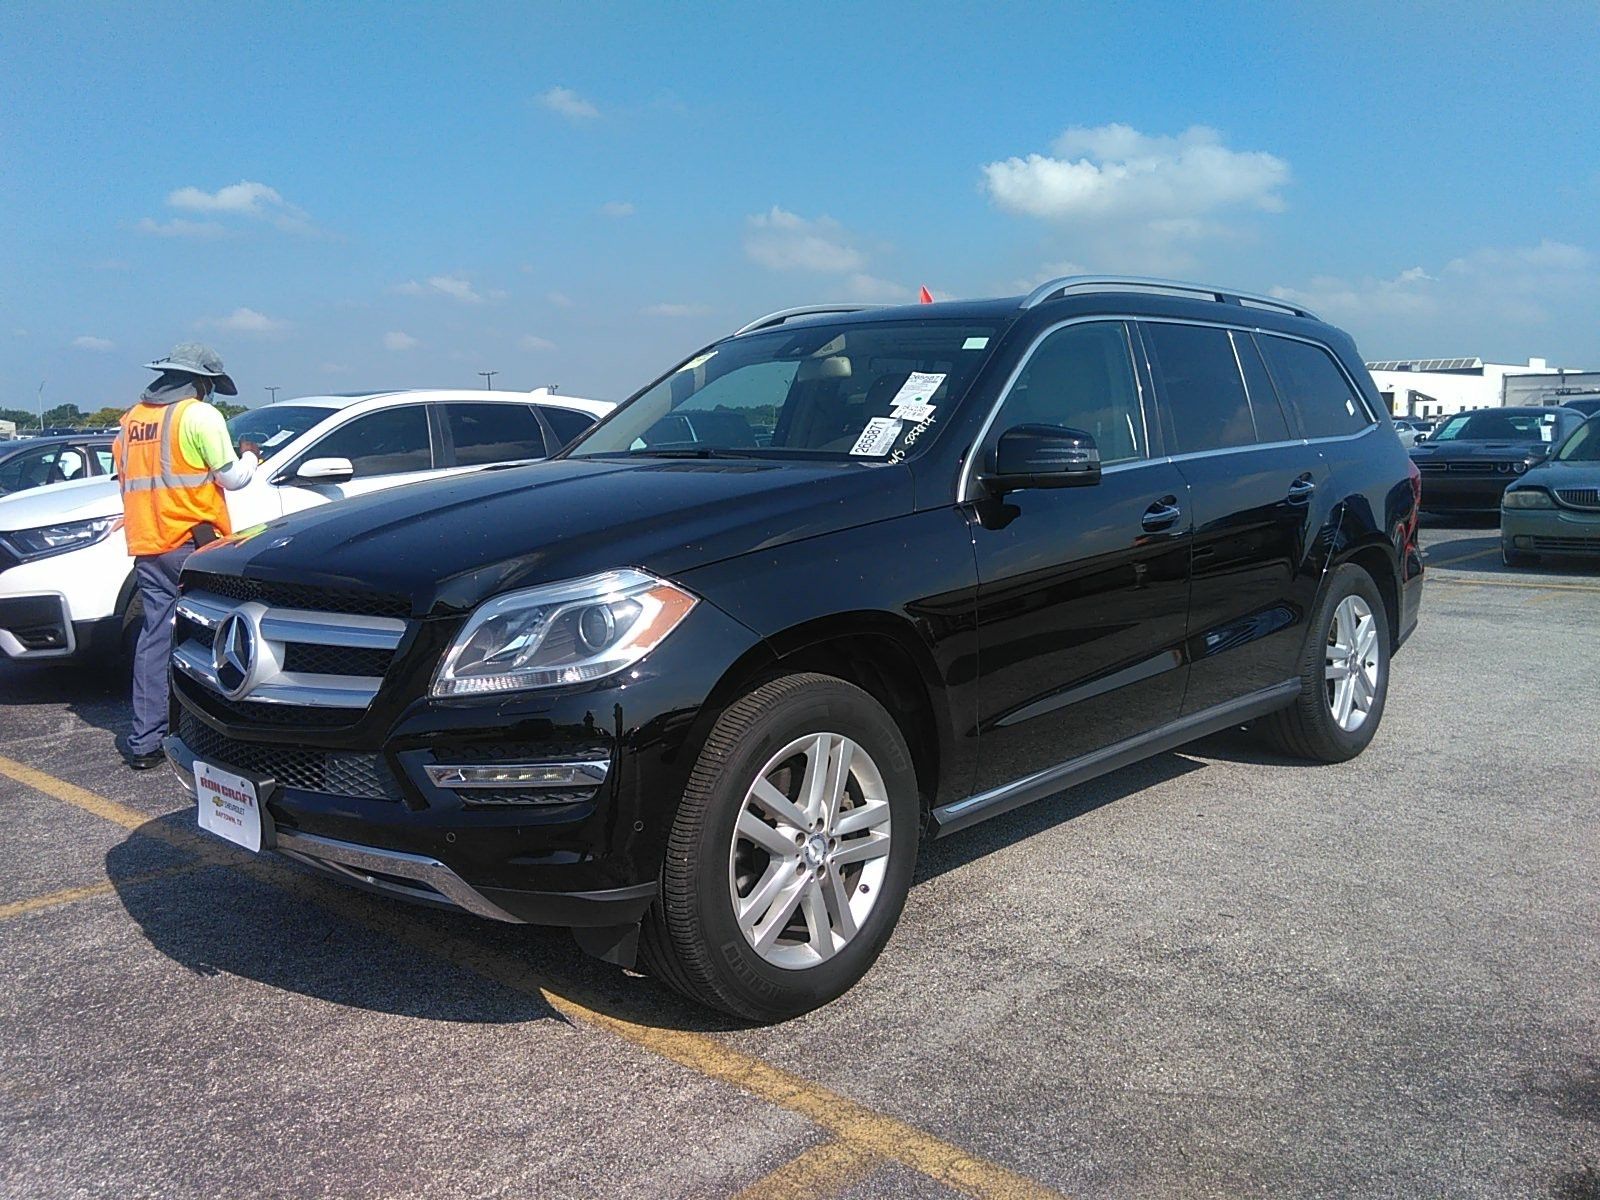 2014 Mercedes Benz GL 450 VIN 4JGDF7CE9EA409689 from the